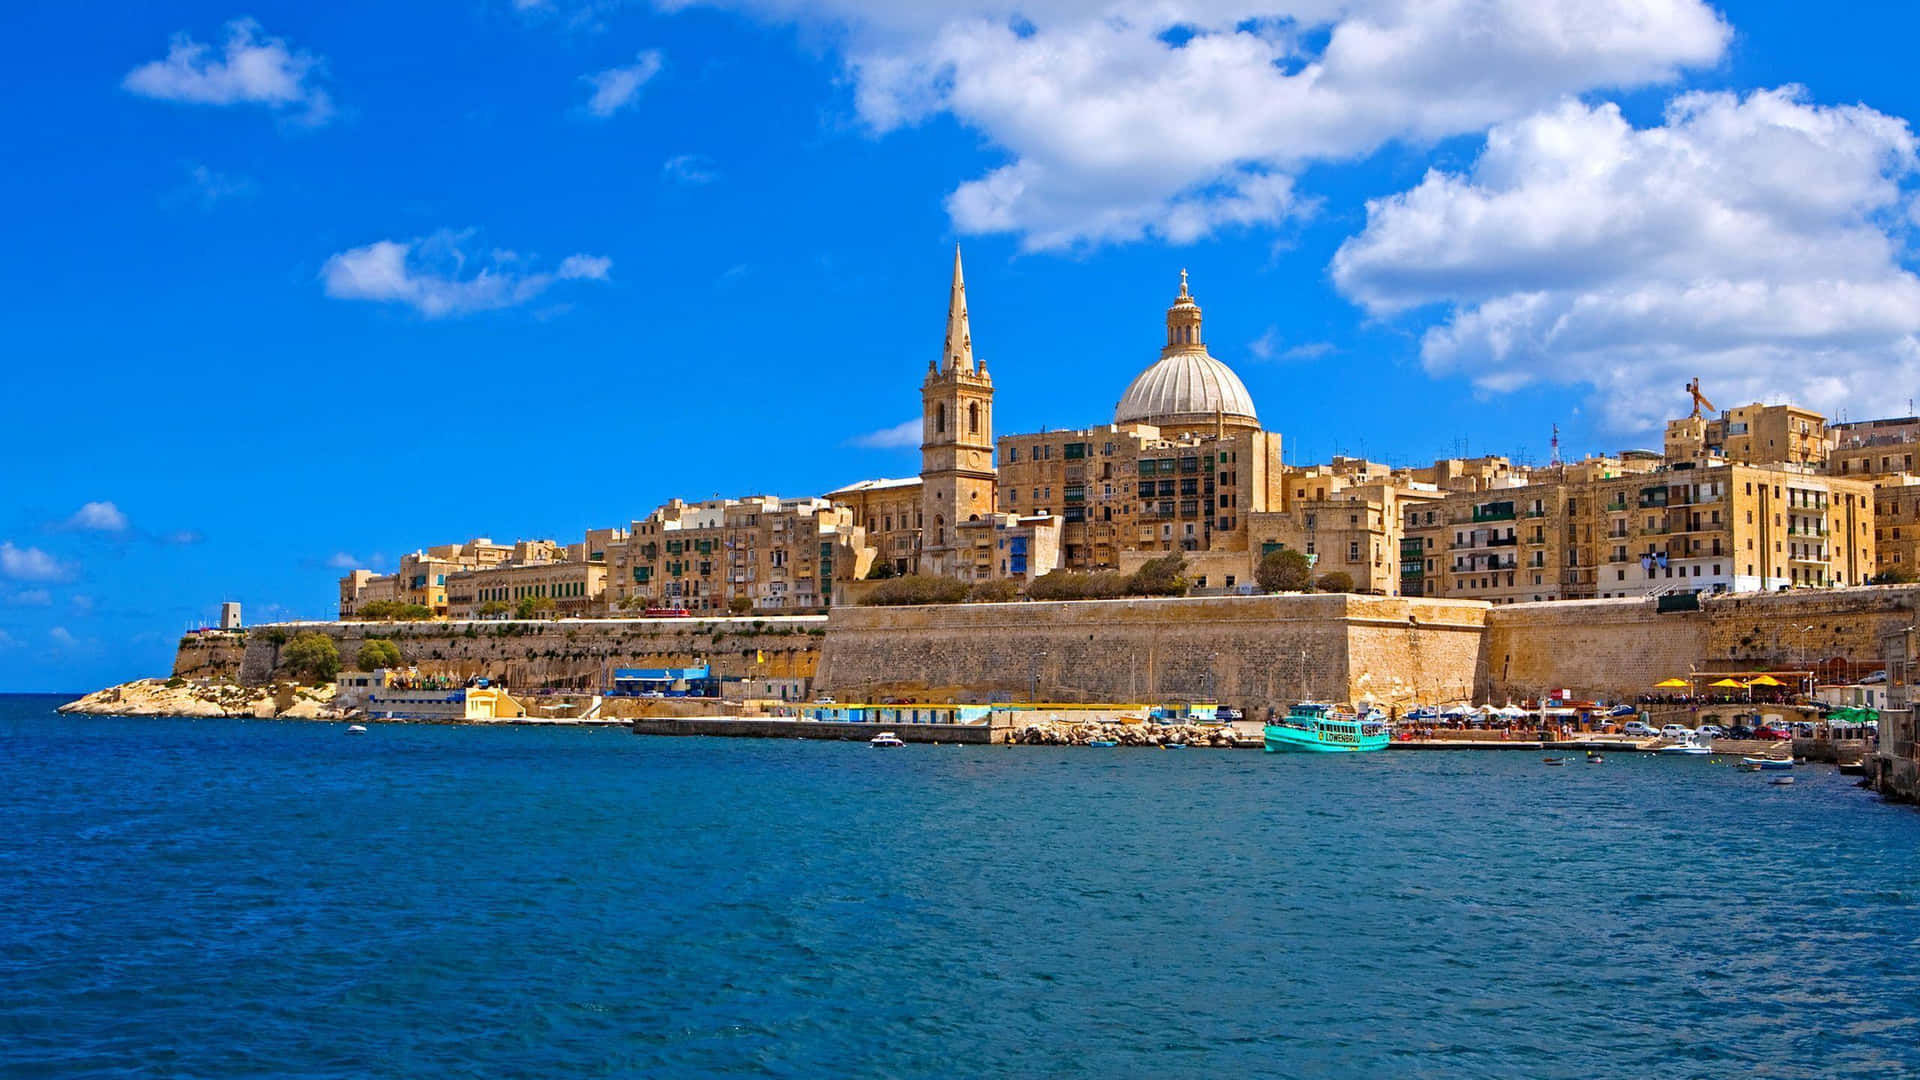 A stunning view of the historic cityscape and crystal-clear waters of Malta.